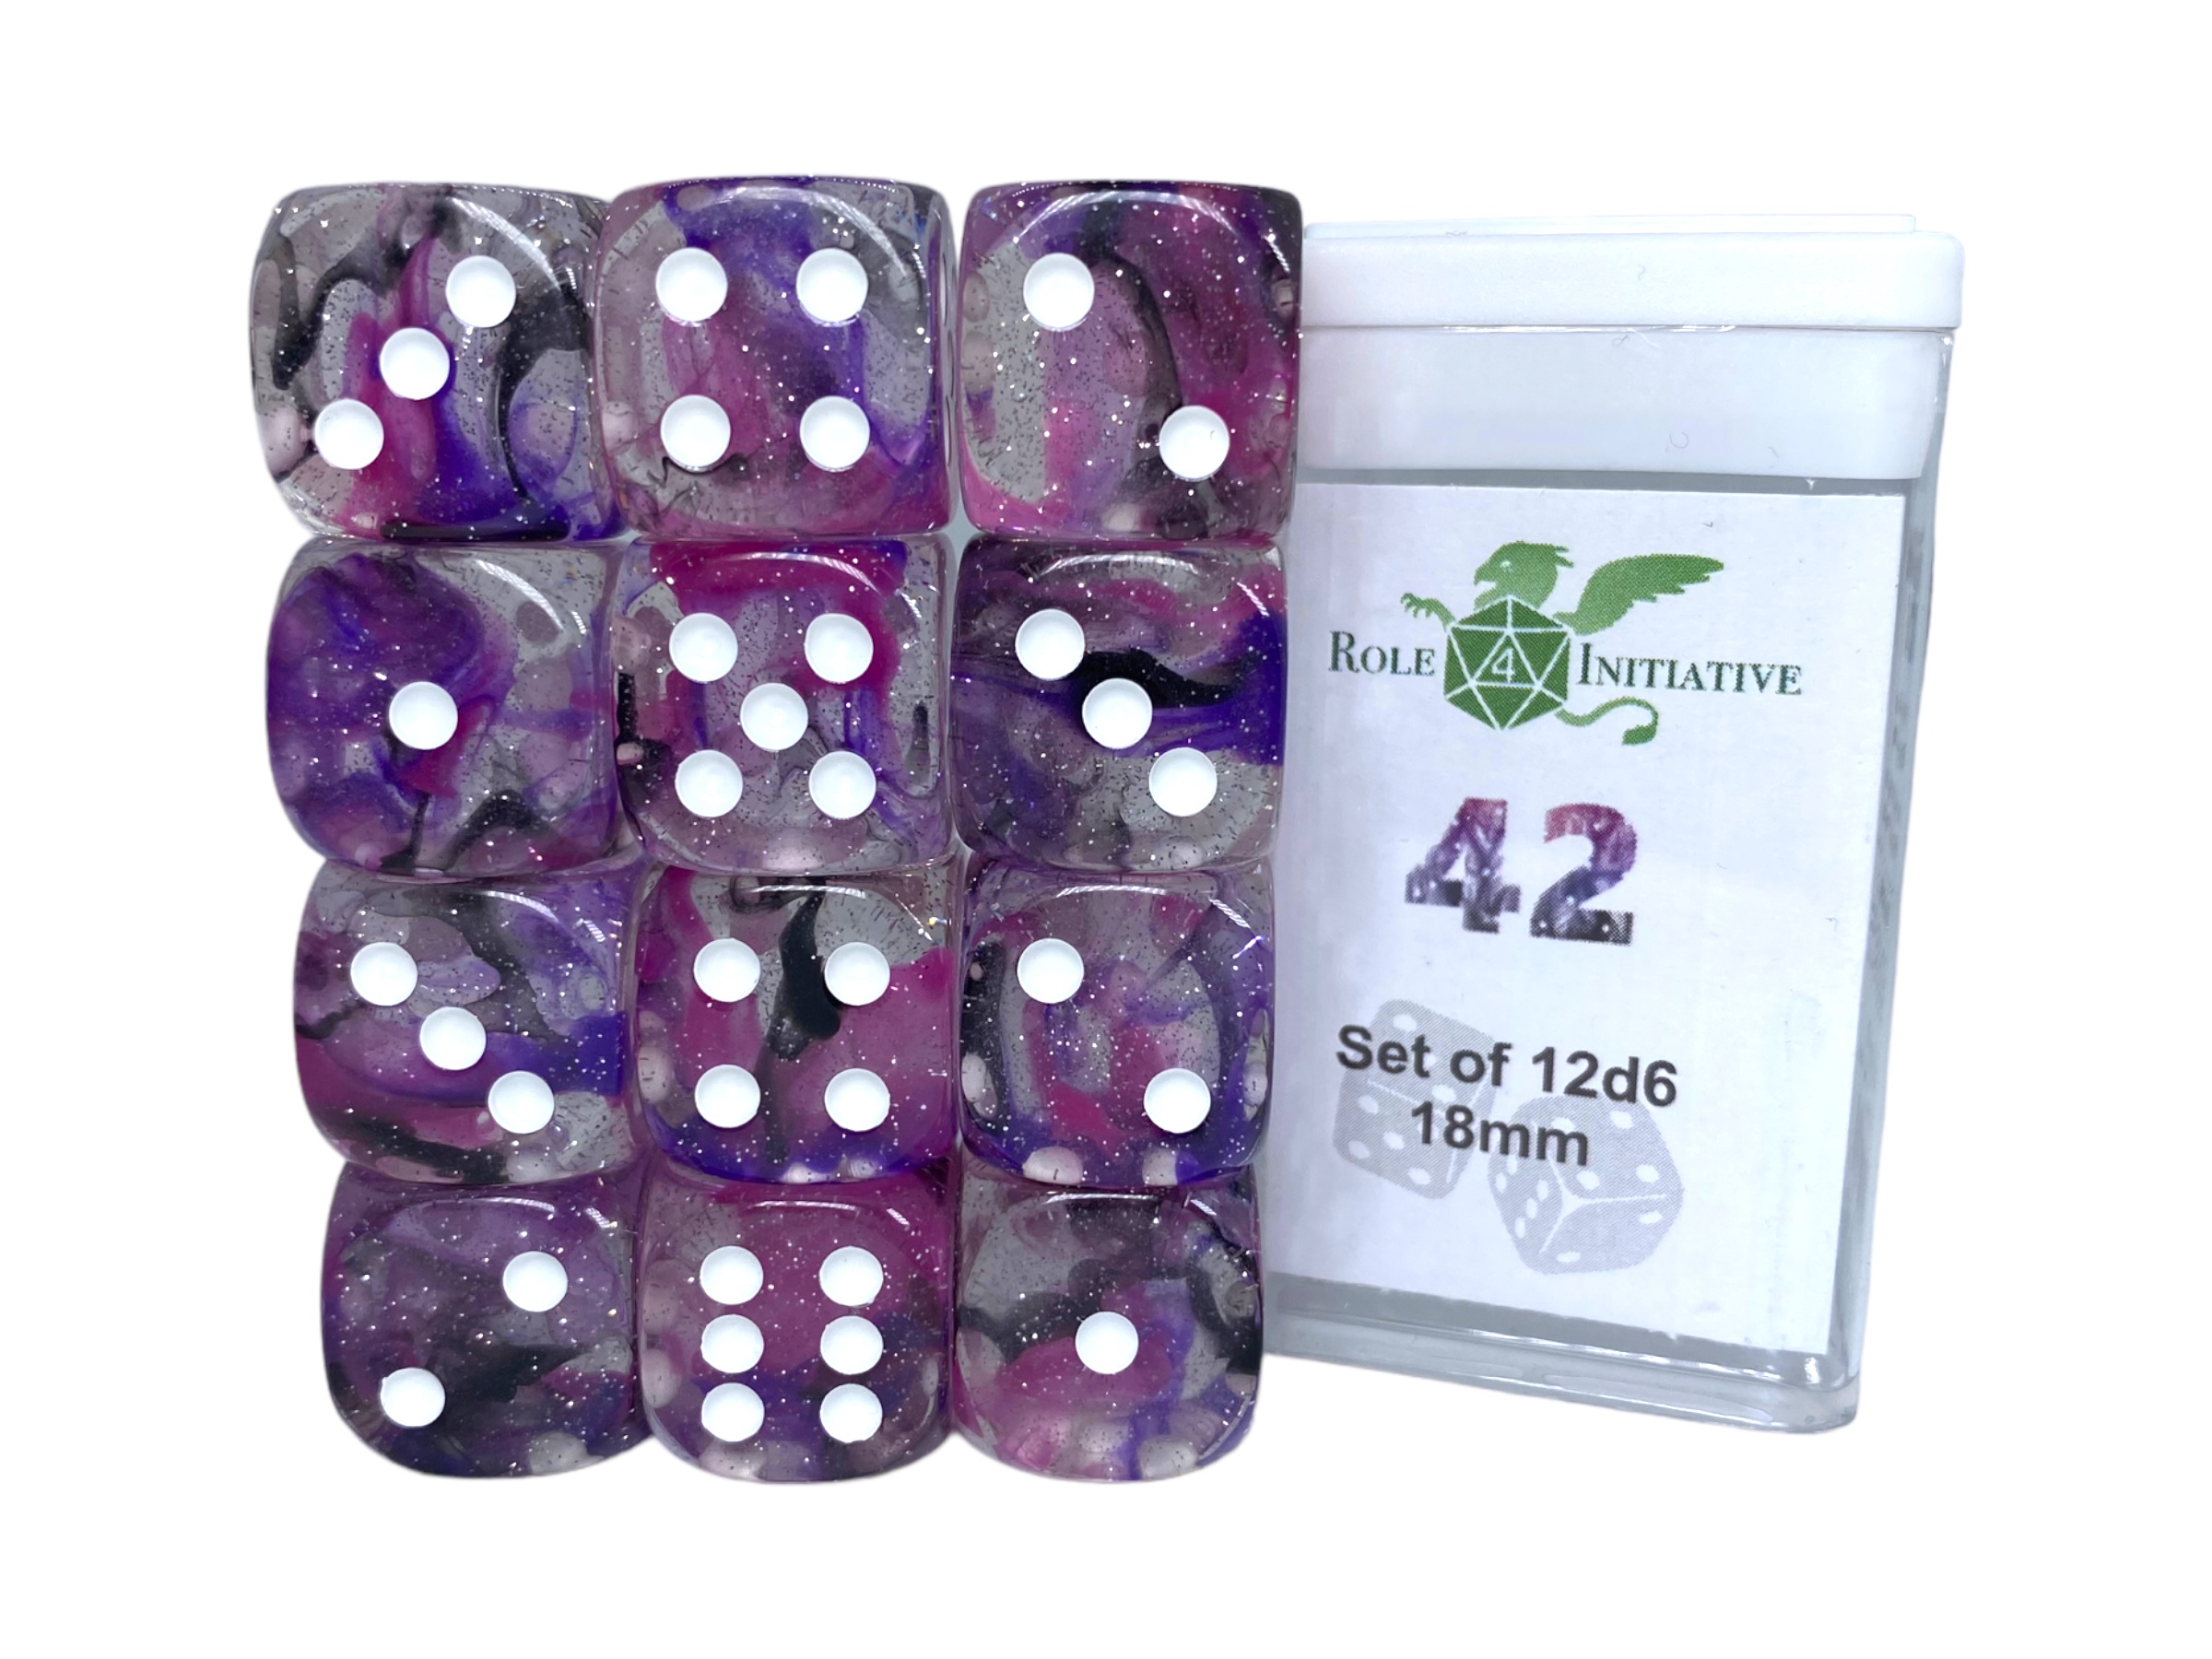 Role 4 Initiative: 12 D6 Pips Dice Set: Diffusion 42 18MM 